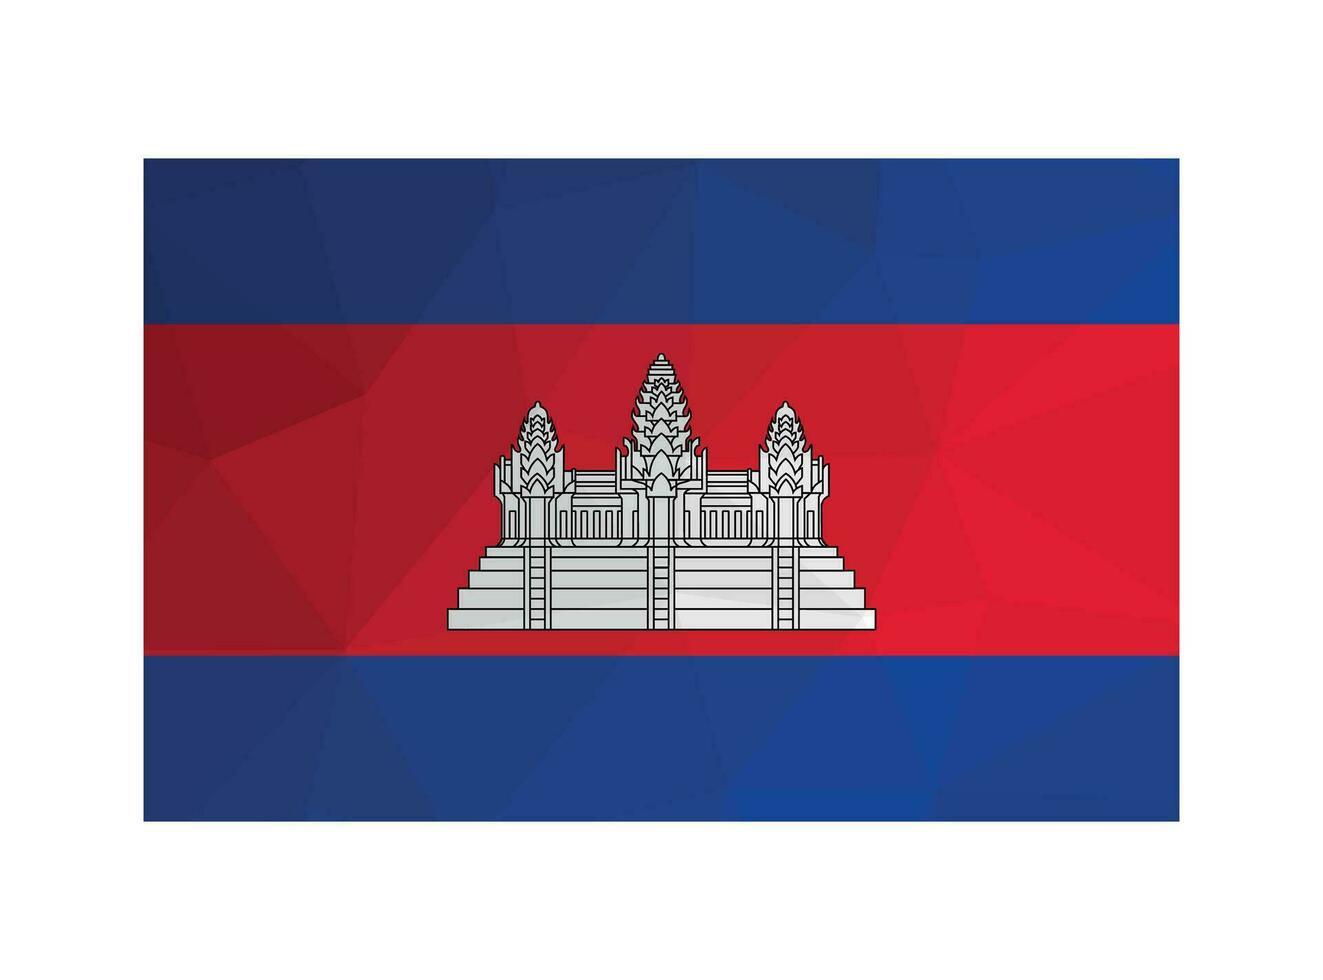 Vector illustration. Official ensign of Cambodia. National flag in red, blue colors with white temple complex Angkor Wat. Creative design in polygonal style